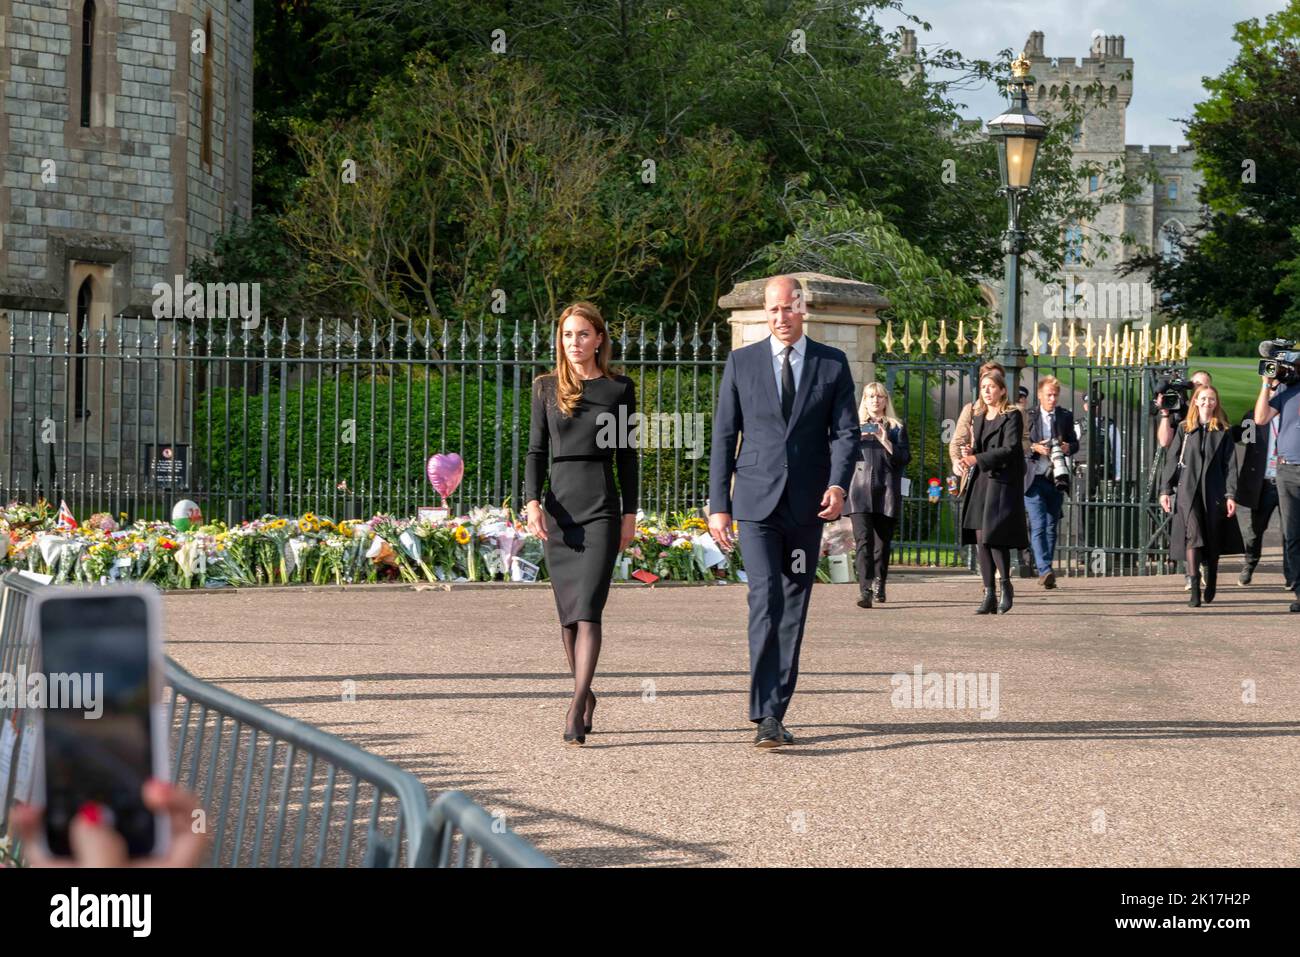 The Duke and Duchess of Sussex arrive with the Prince and Princess of Wales at Windsor Castle to greet well-wishers, during the second day of national Stock Photo